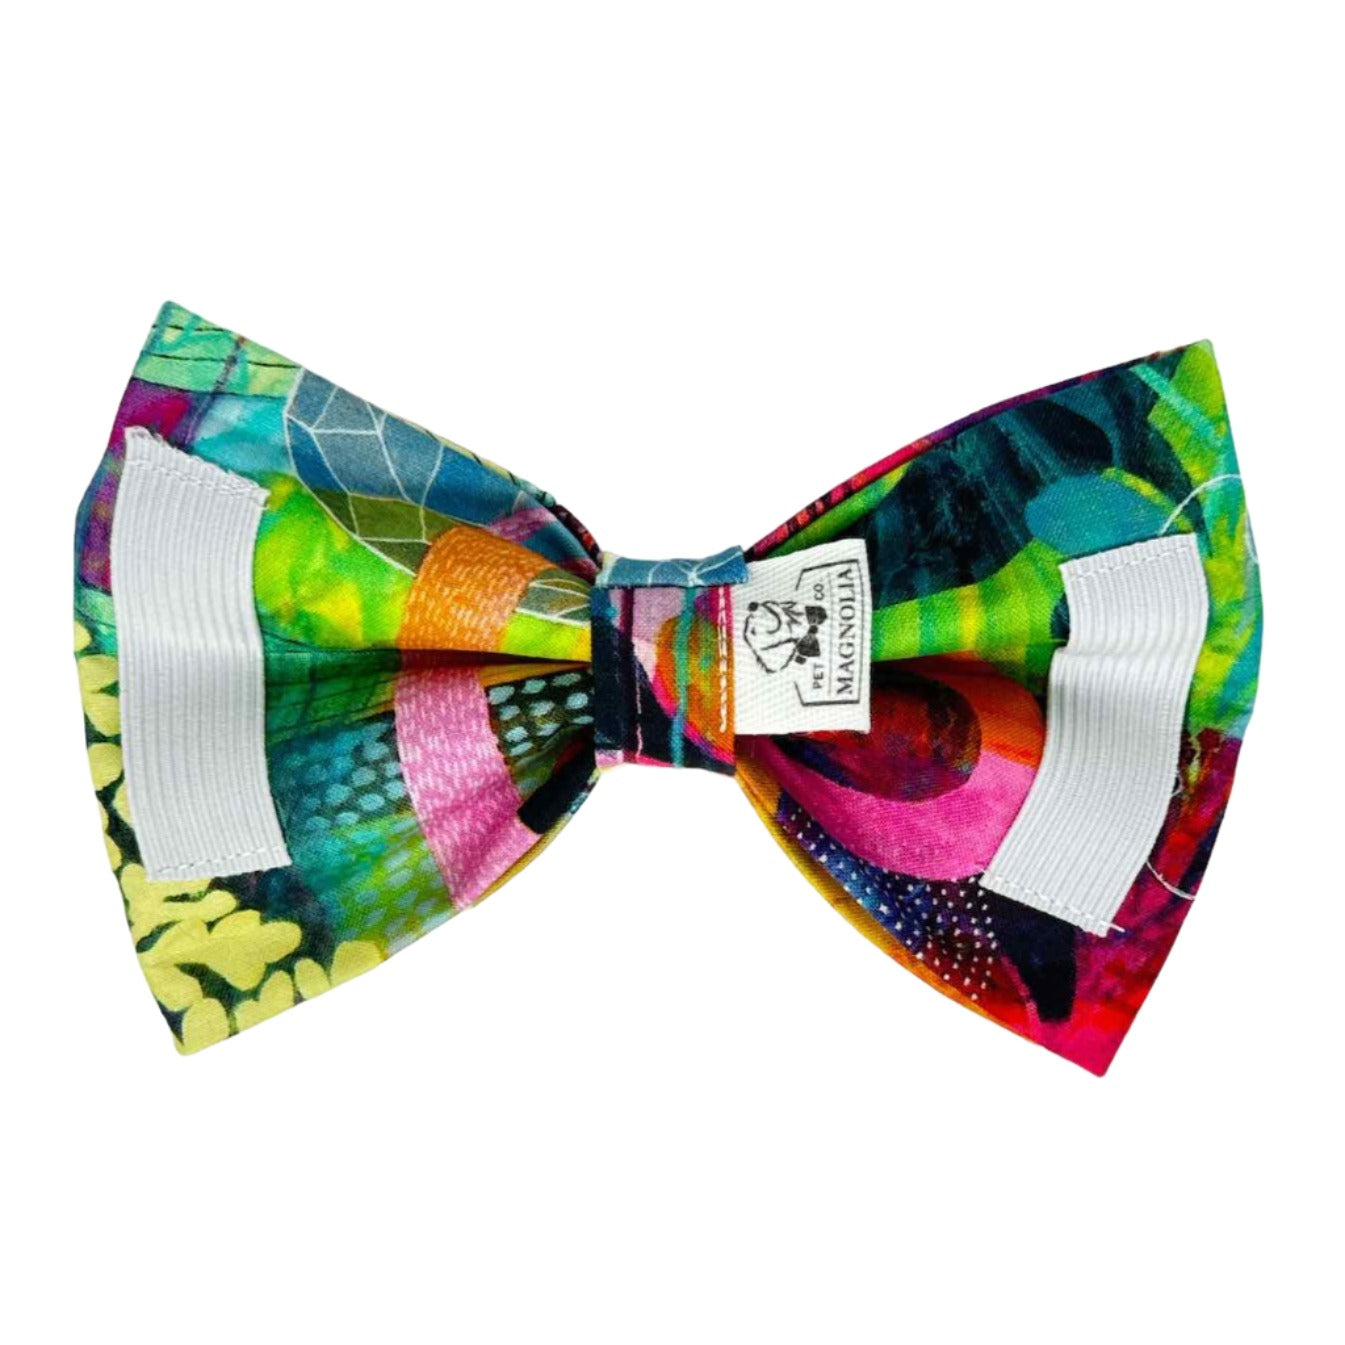 Wild at Heart dog bow tie by Magnolia Pet Company. Bright colorful painterly abstract pattern.